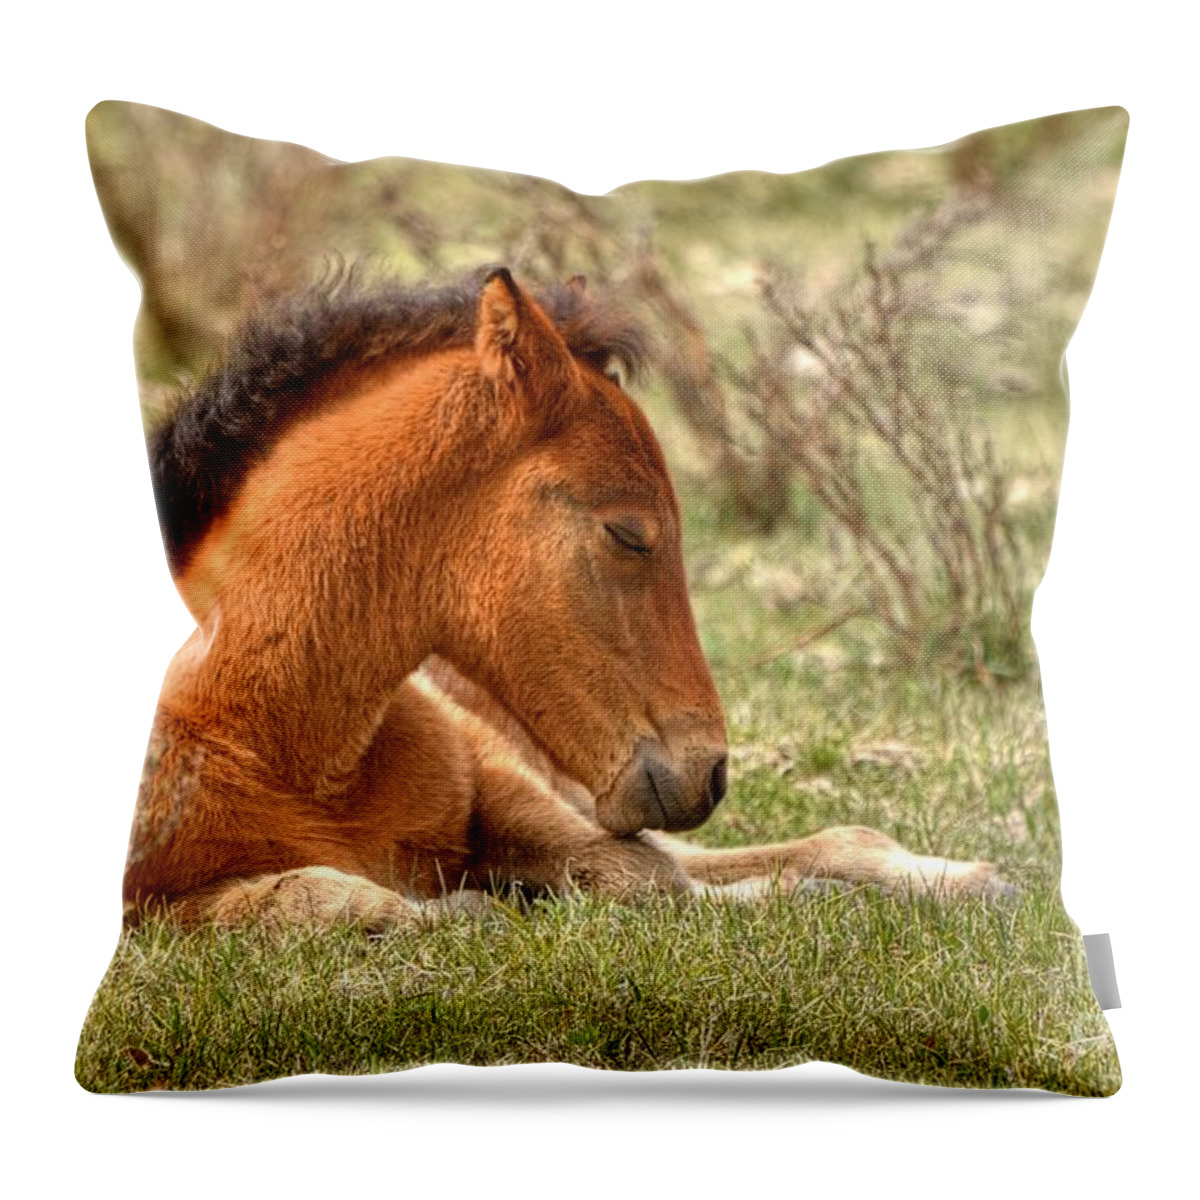 Colt Throw Pillow featuring the photograph Sleepy by James Anderson